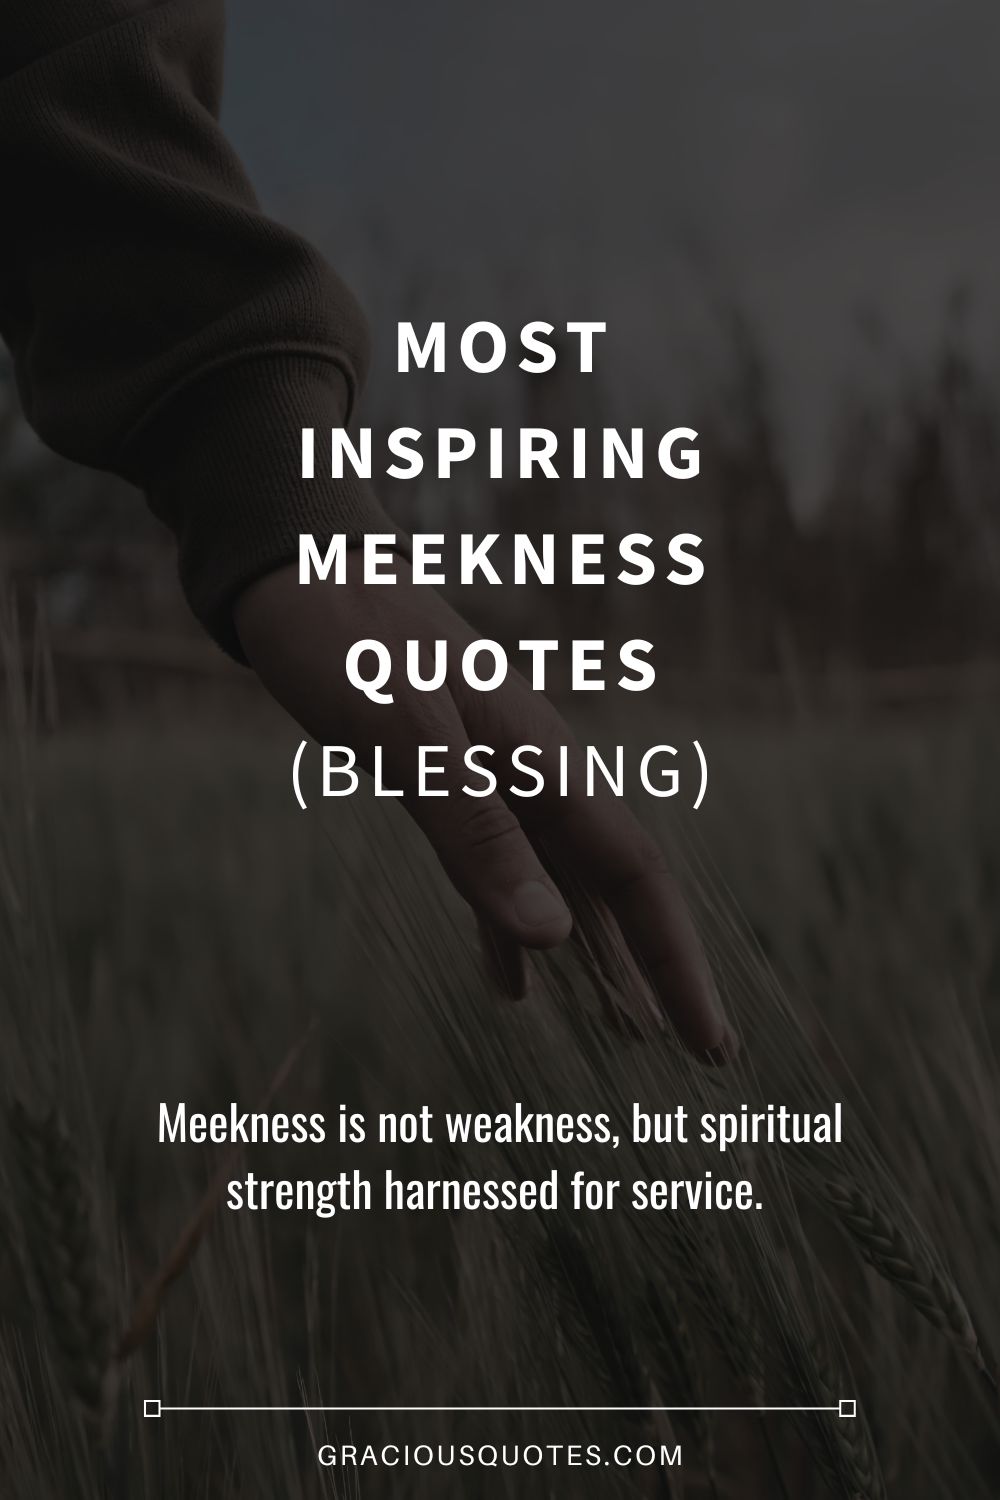 Most Inspiring Meekness Quotes (BLESSING) - Gracious Quotes